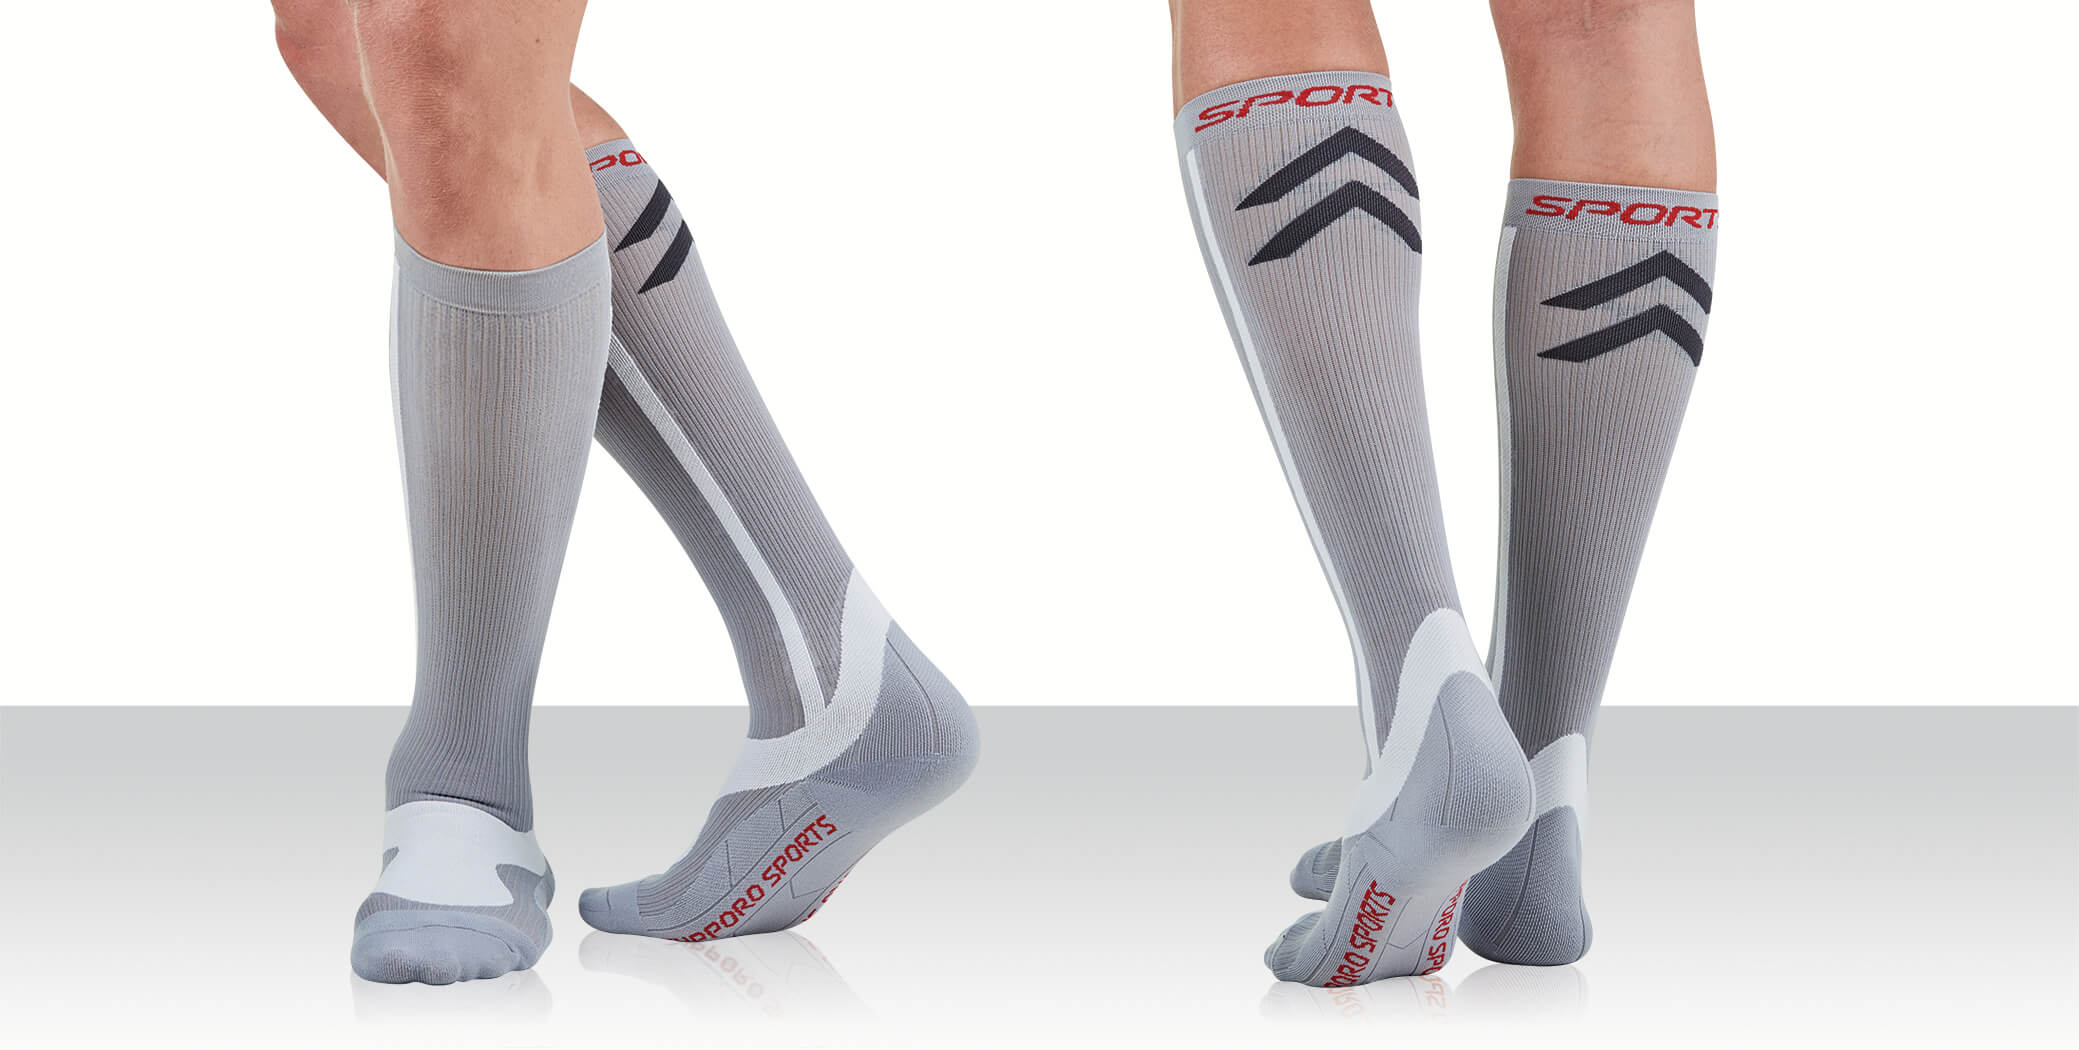 2XU Unisex Compression Socks for Recovery